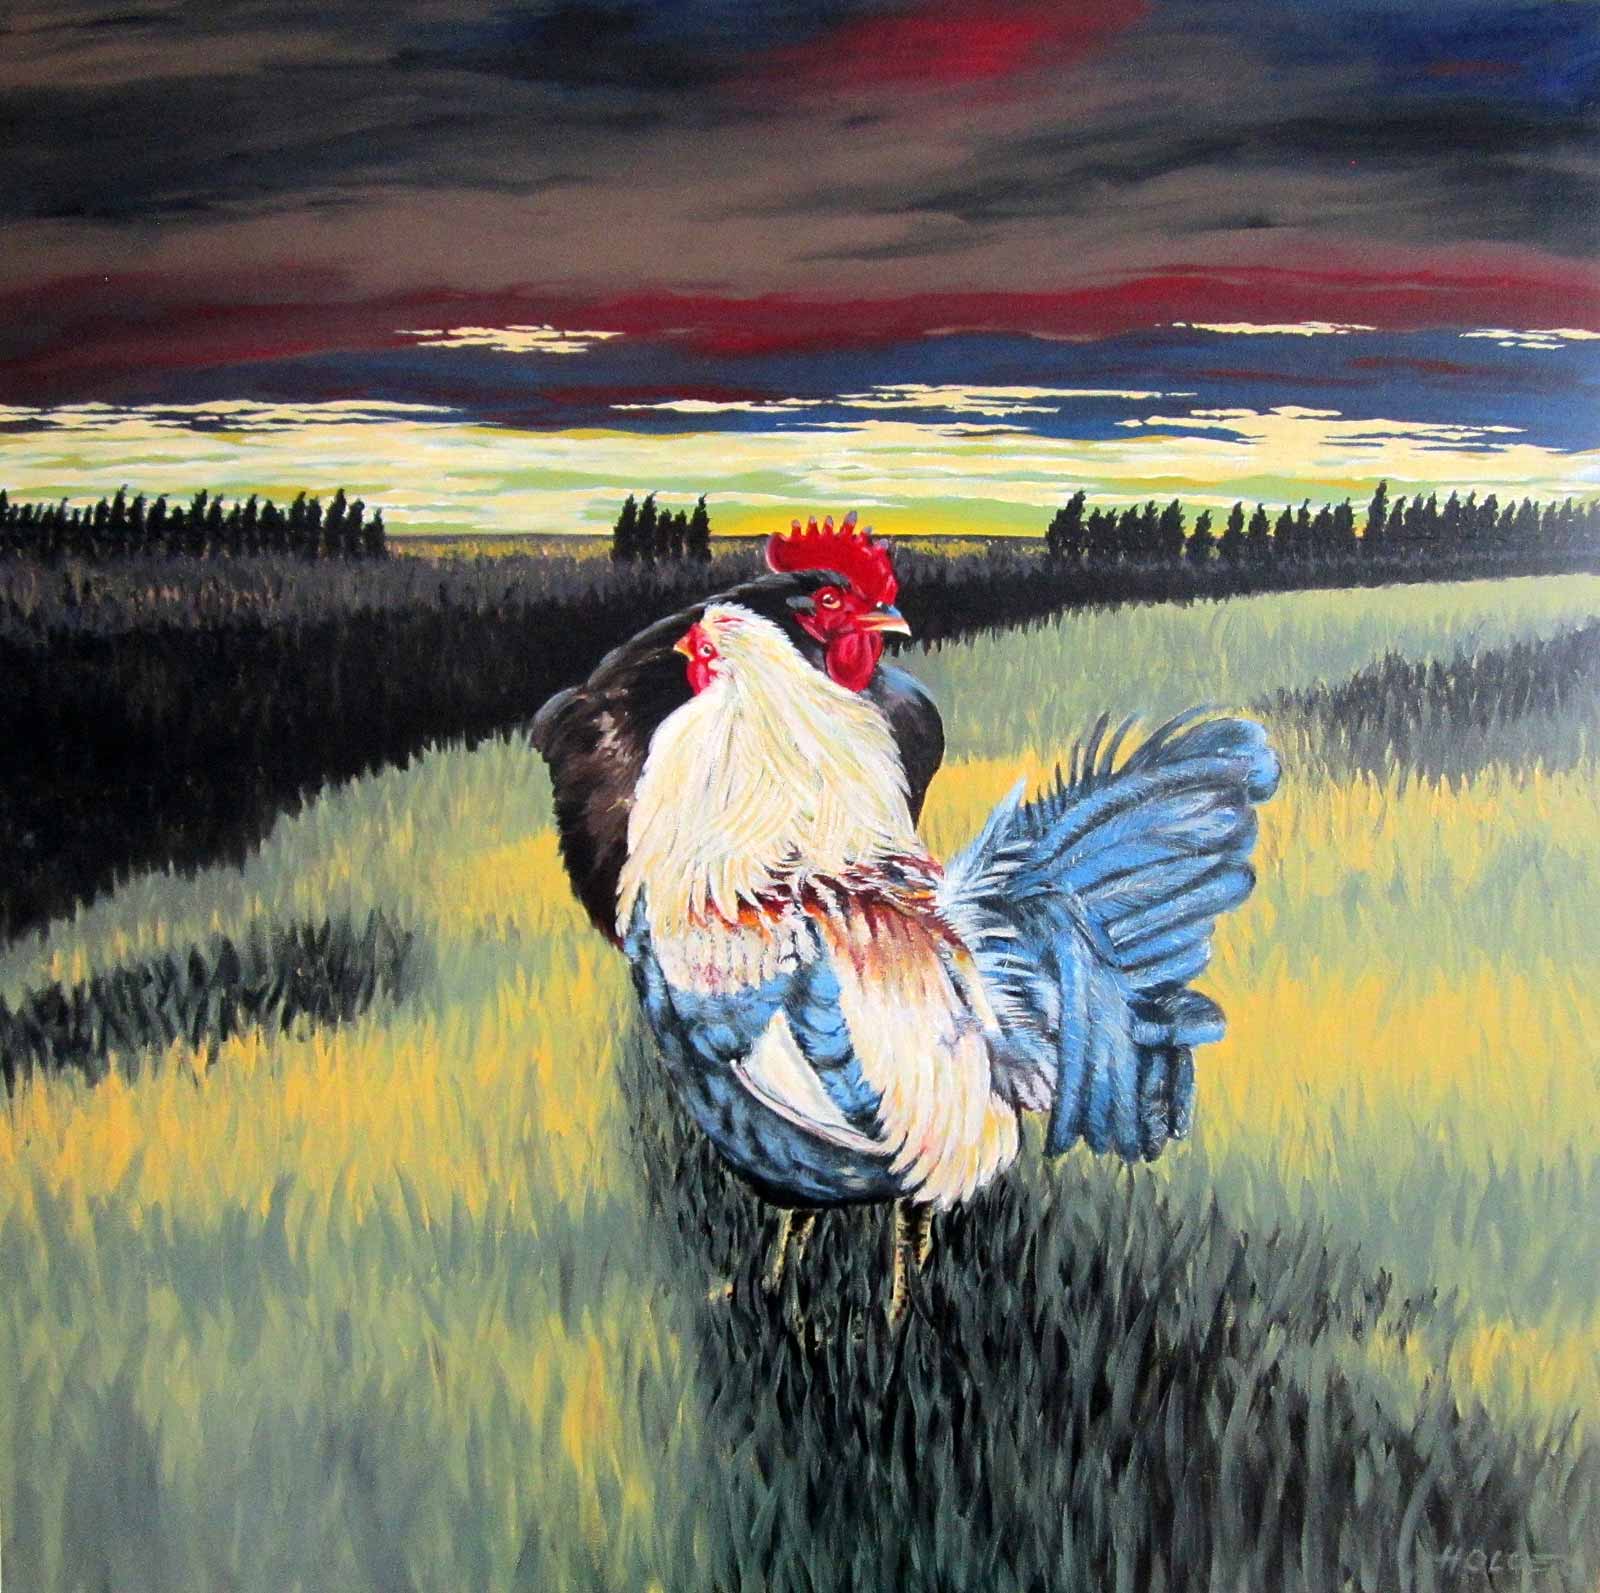 "End of the Day - Chicken", 32x32